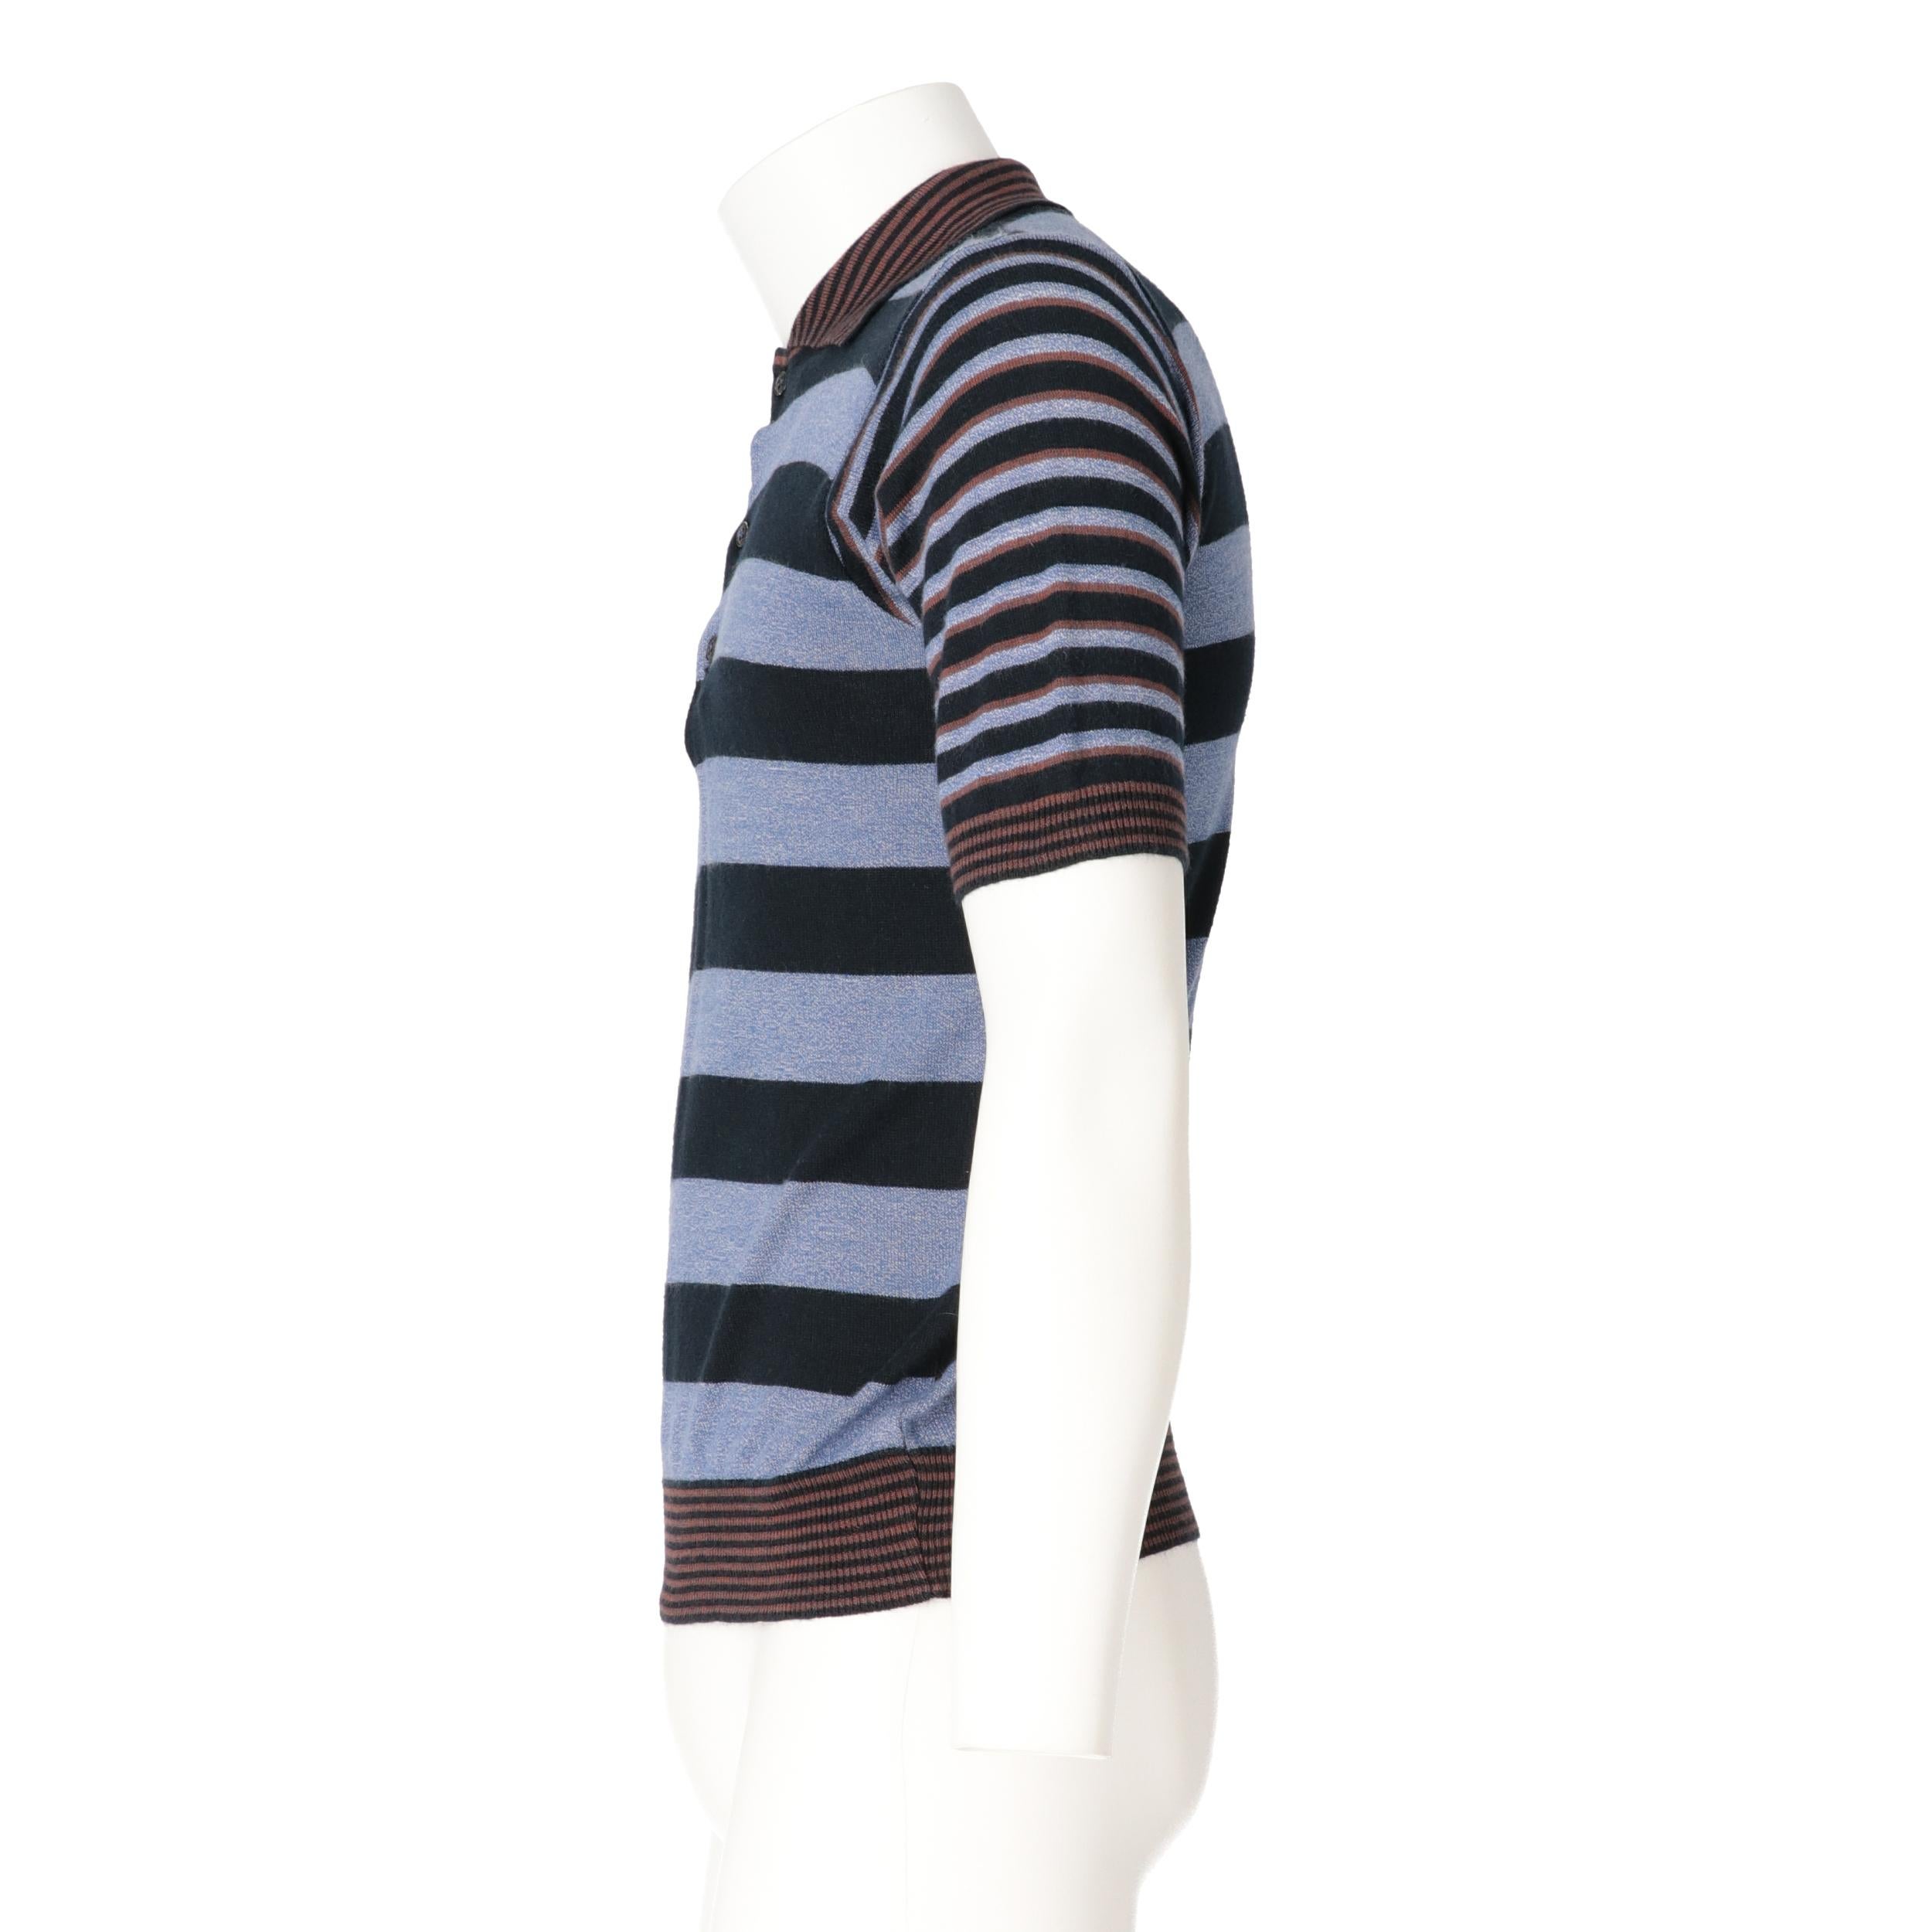 Kenzo blue, blue, black and brown striped cotton knit polo shirt. Classic collar and three front buttons.
Years: 70s

Made in France

Size: 46 IT

Linear measures 

Height: 60 cm
Bust: 46 cm
Shoulders: 42 cm
Sleeves: 24,5 cm